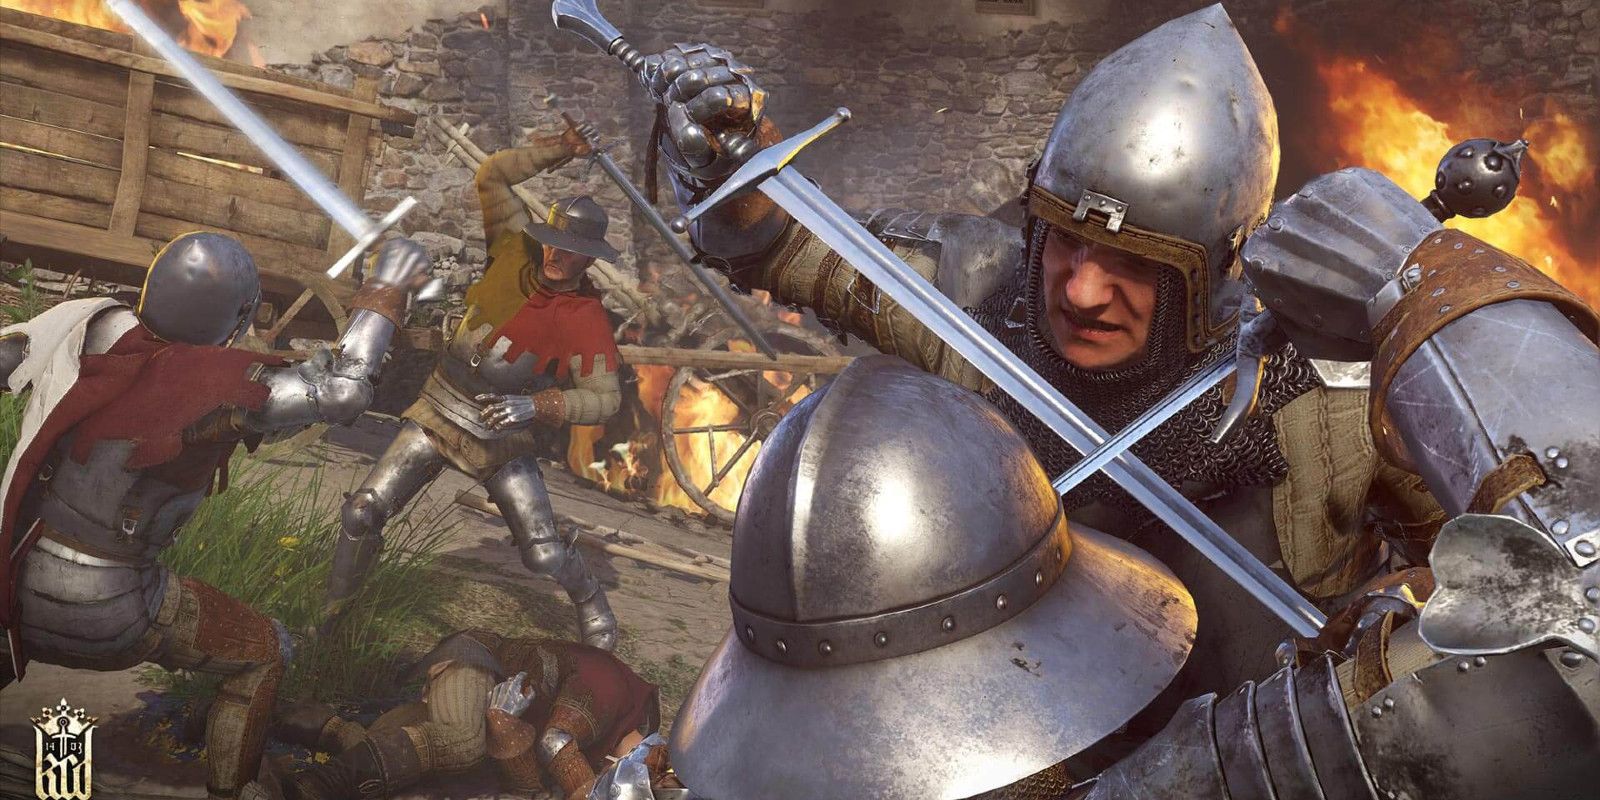 Medieval soldiers battle with swords in Kingdom Come: Deliverance.